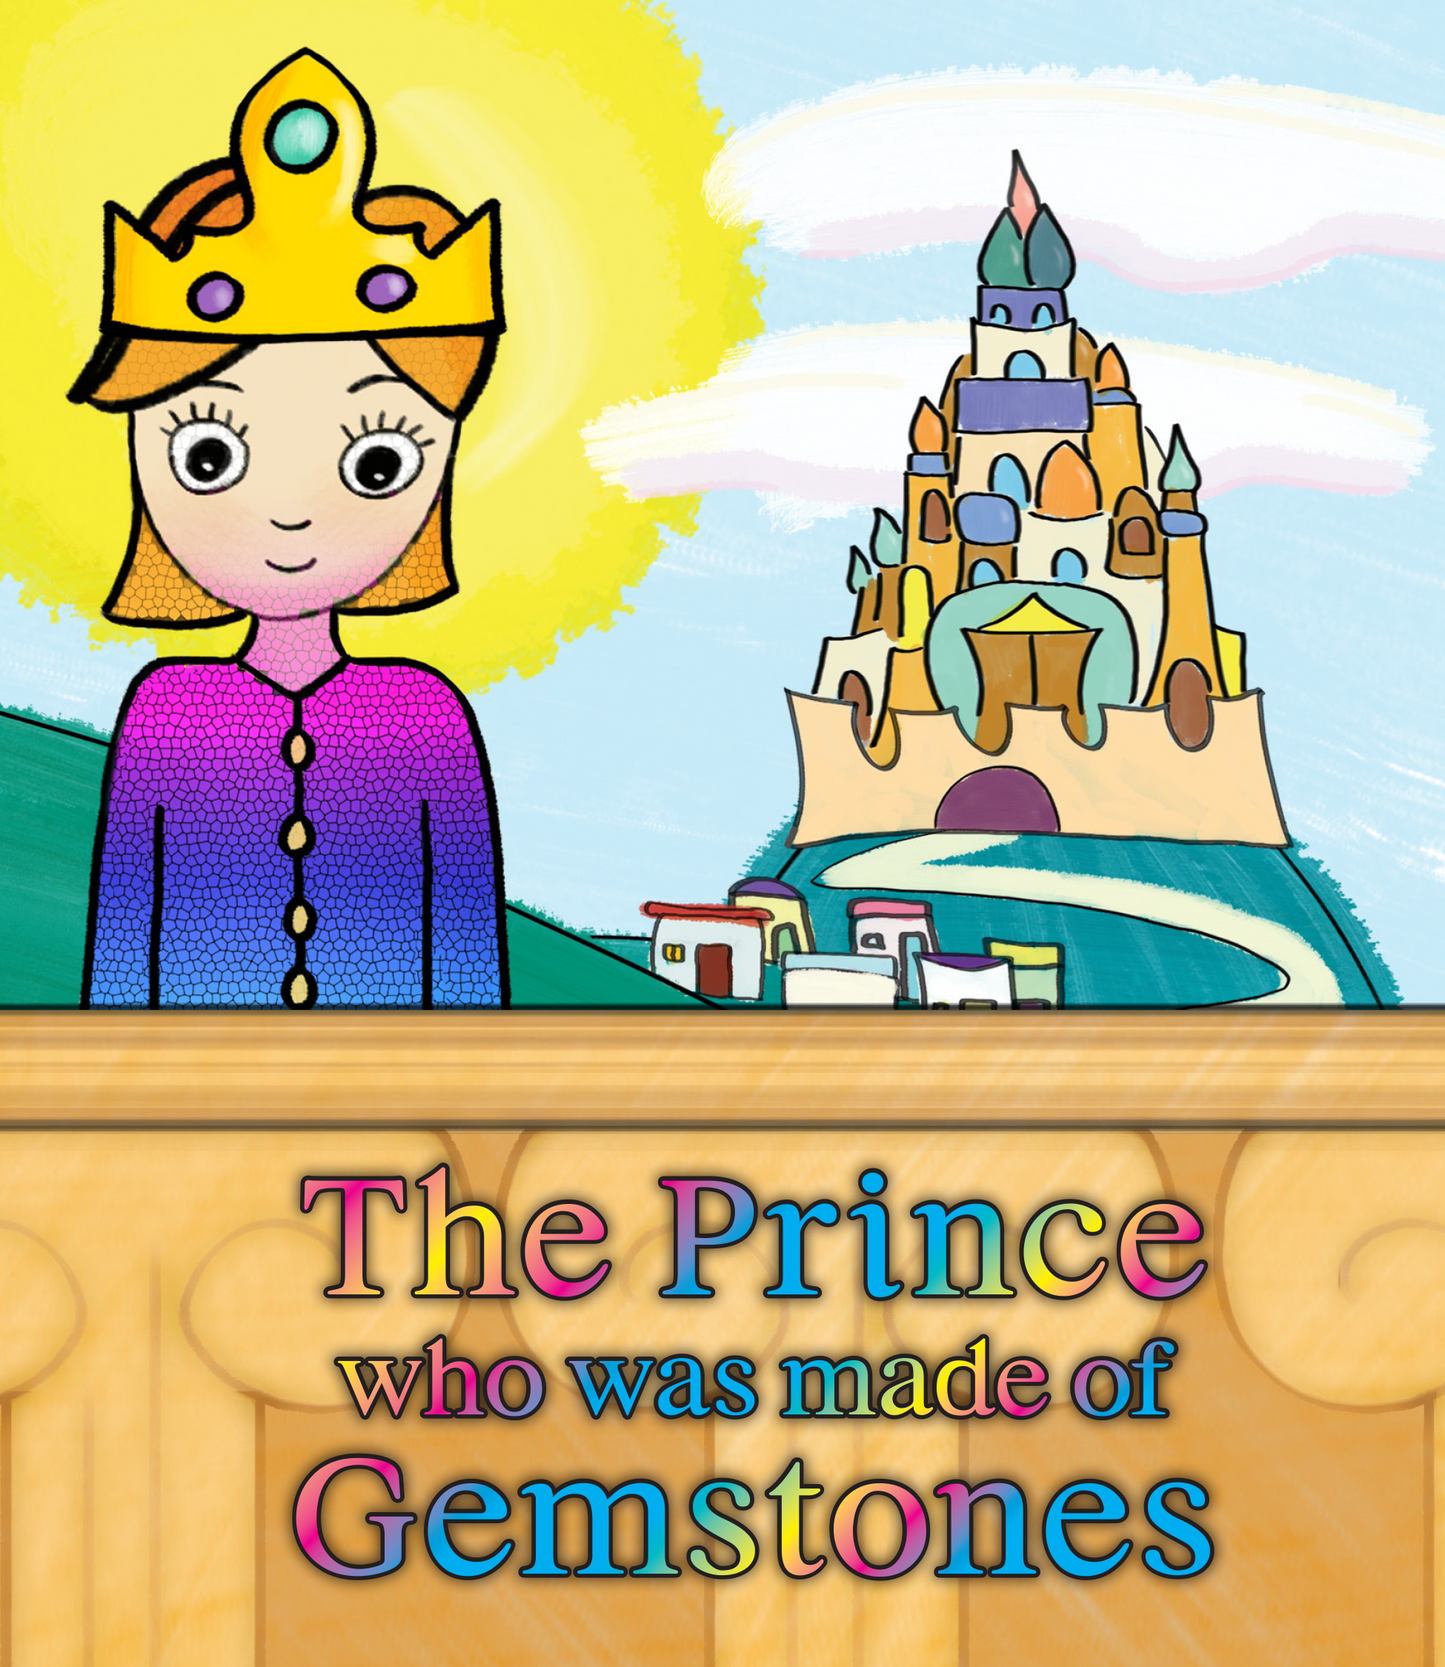 The Prince Who Was Made of Gemstones by Rav Dror (Hardcover)